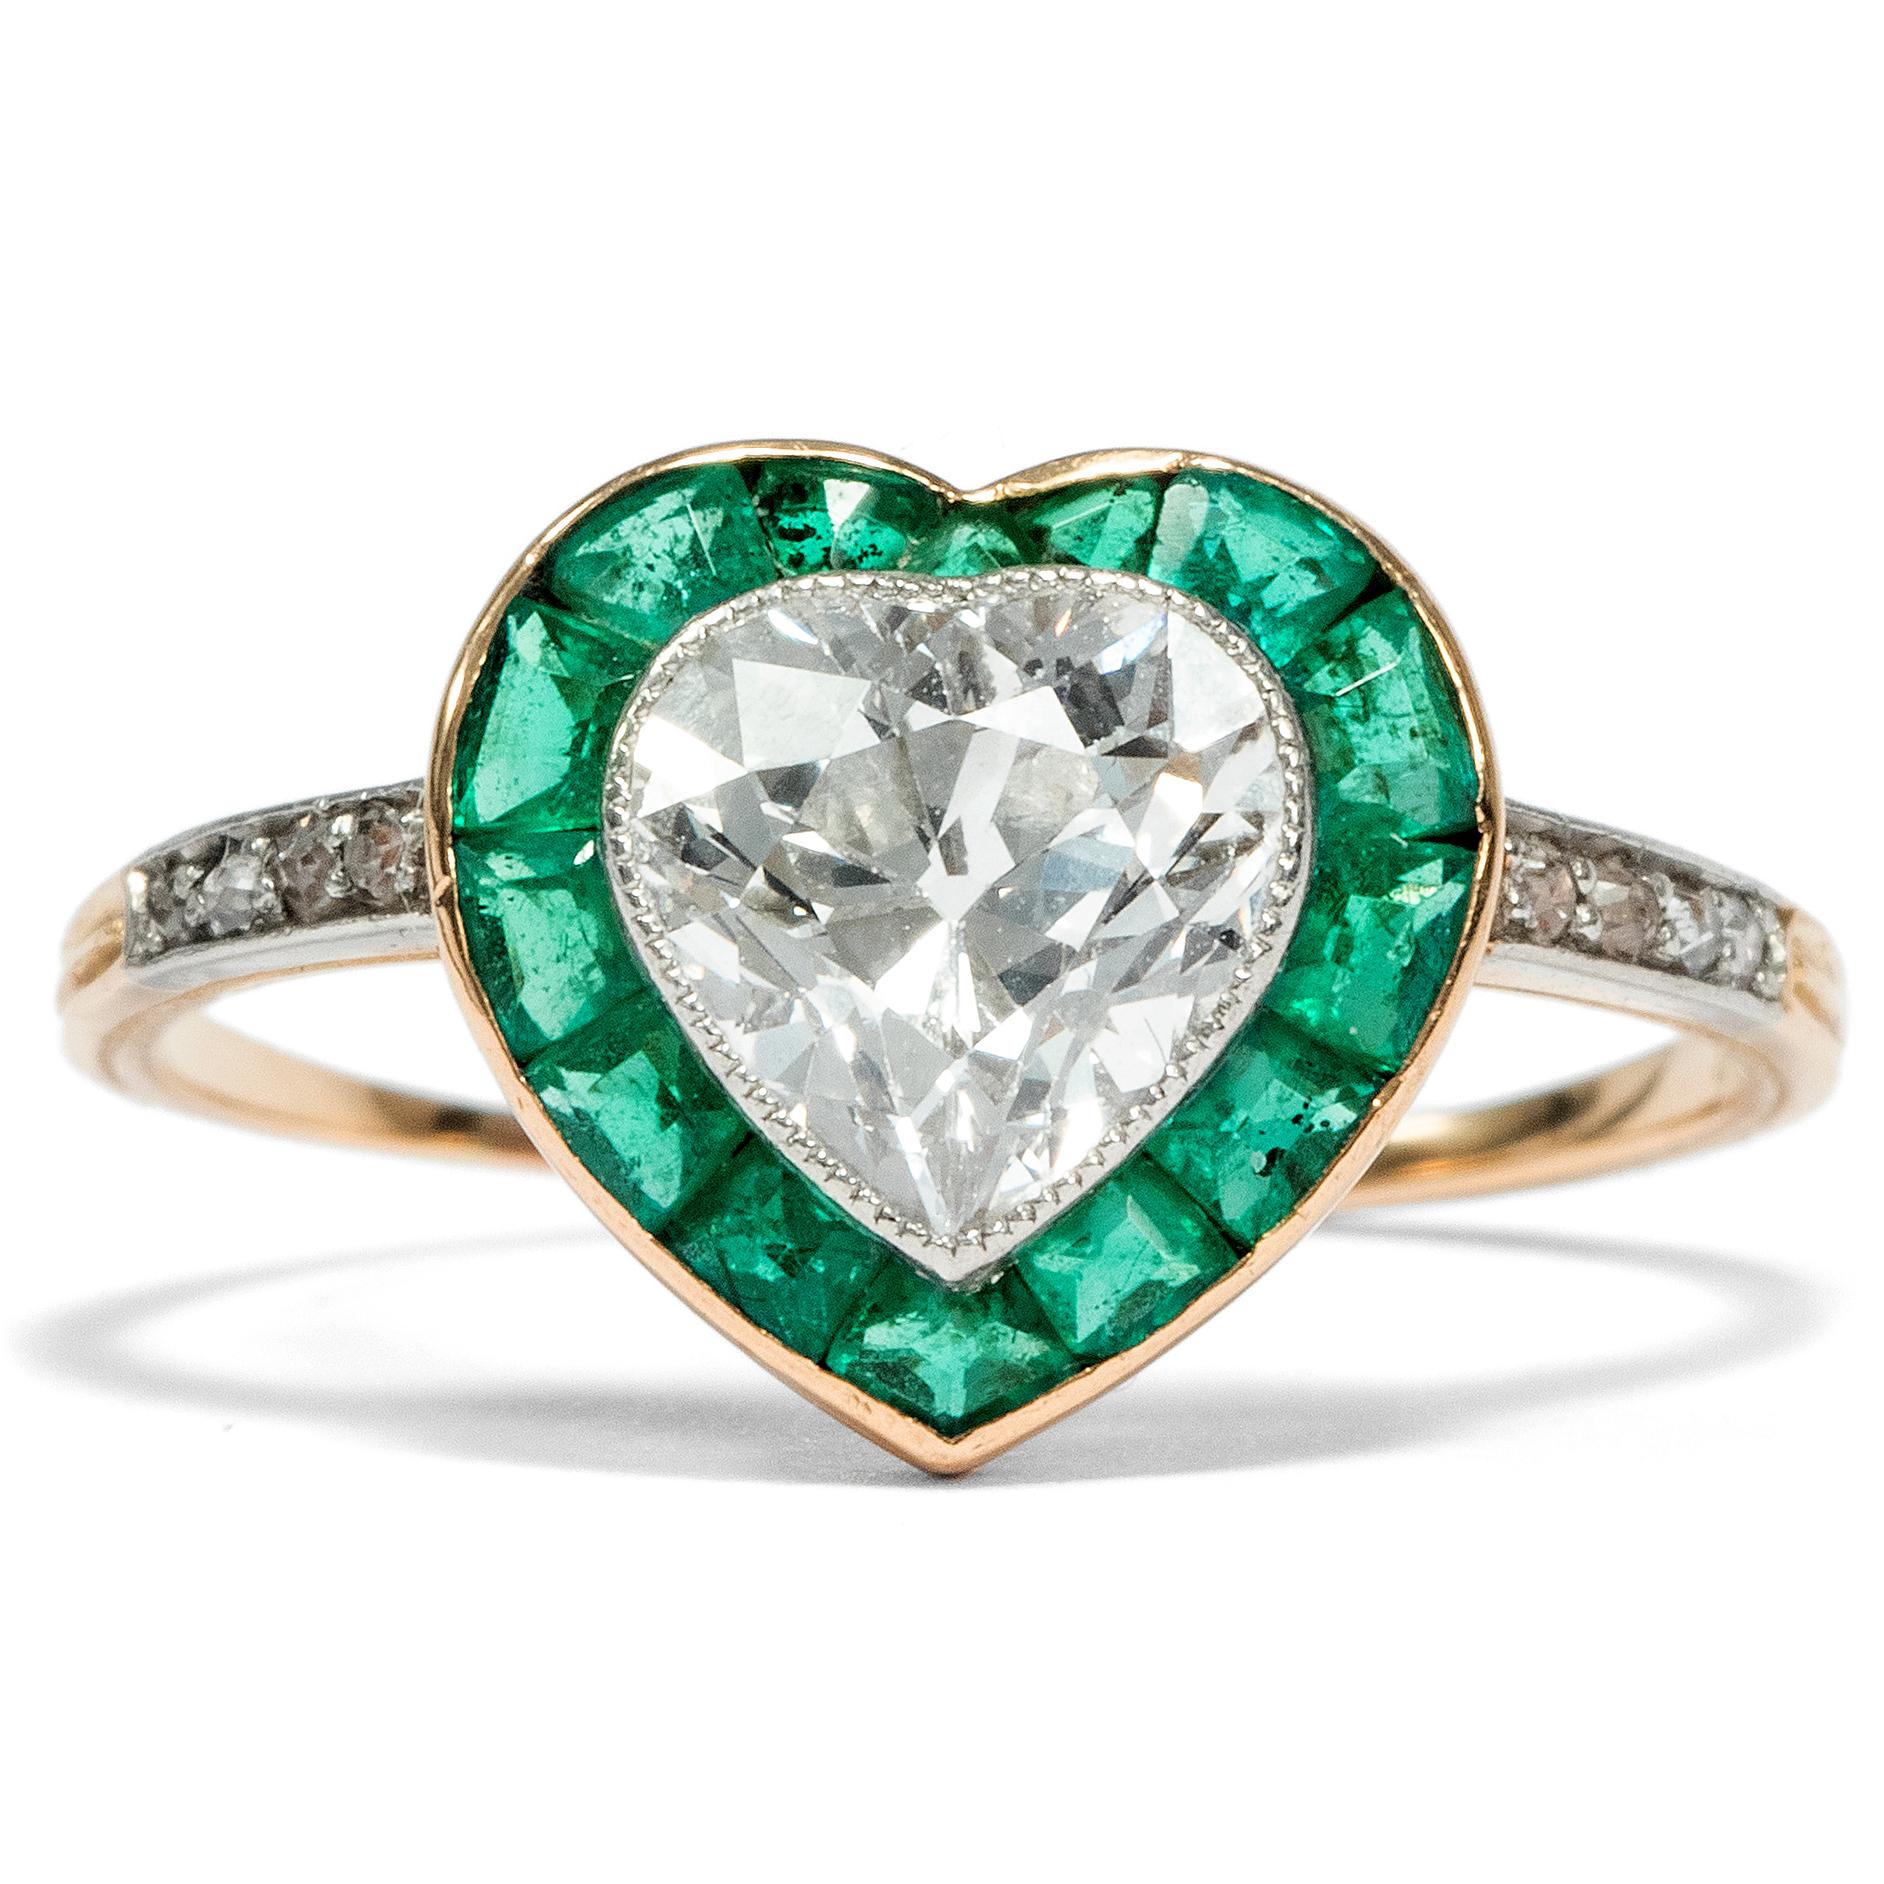 This ring shows us all the fineness and precision of Edwardian craftsmanship: there are the calibré-cut emeralds, which are made to frame the ring face seamlessly; there are the platinum diamond settings, which hold the diamonds without tainting